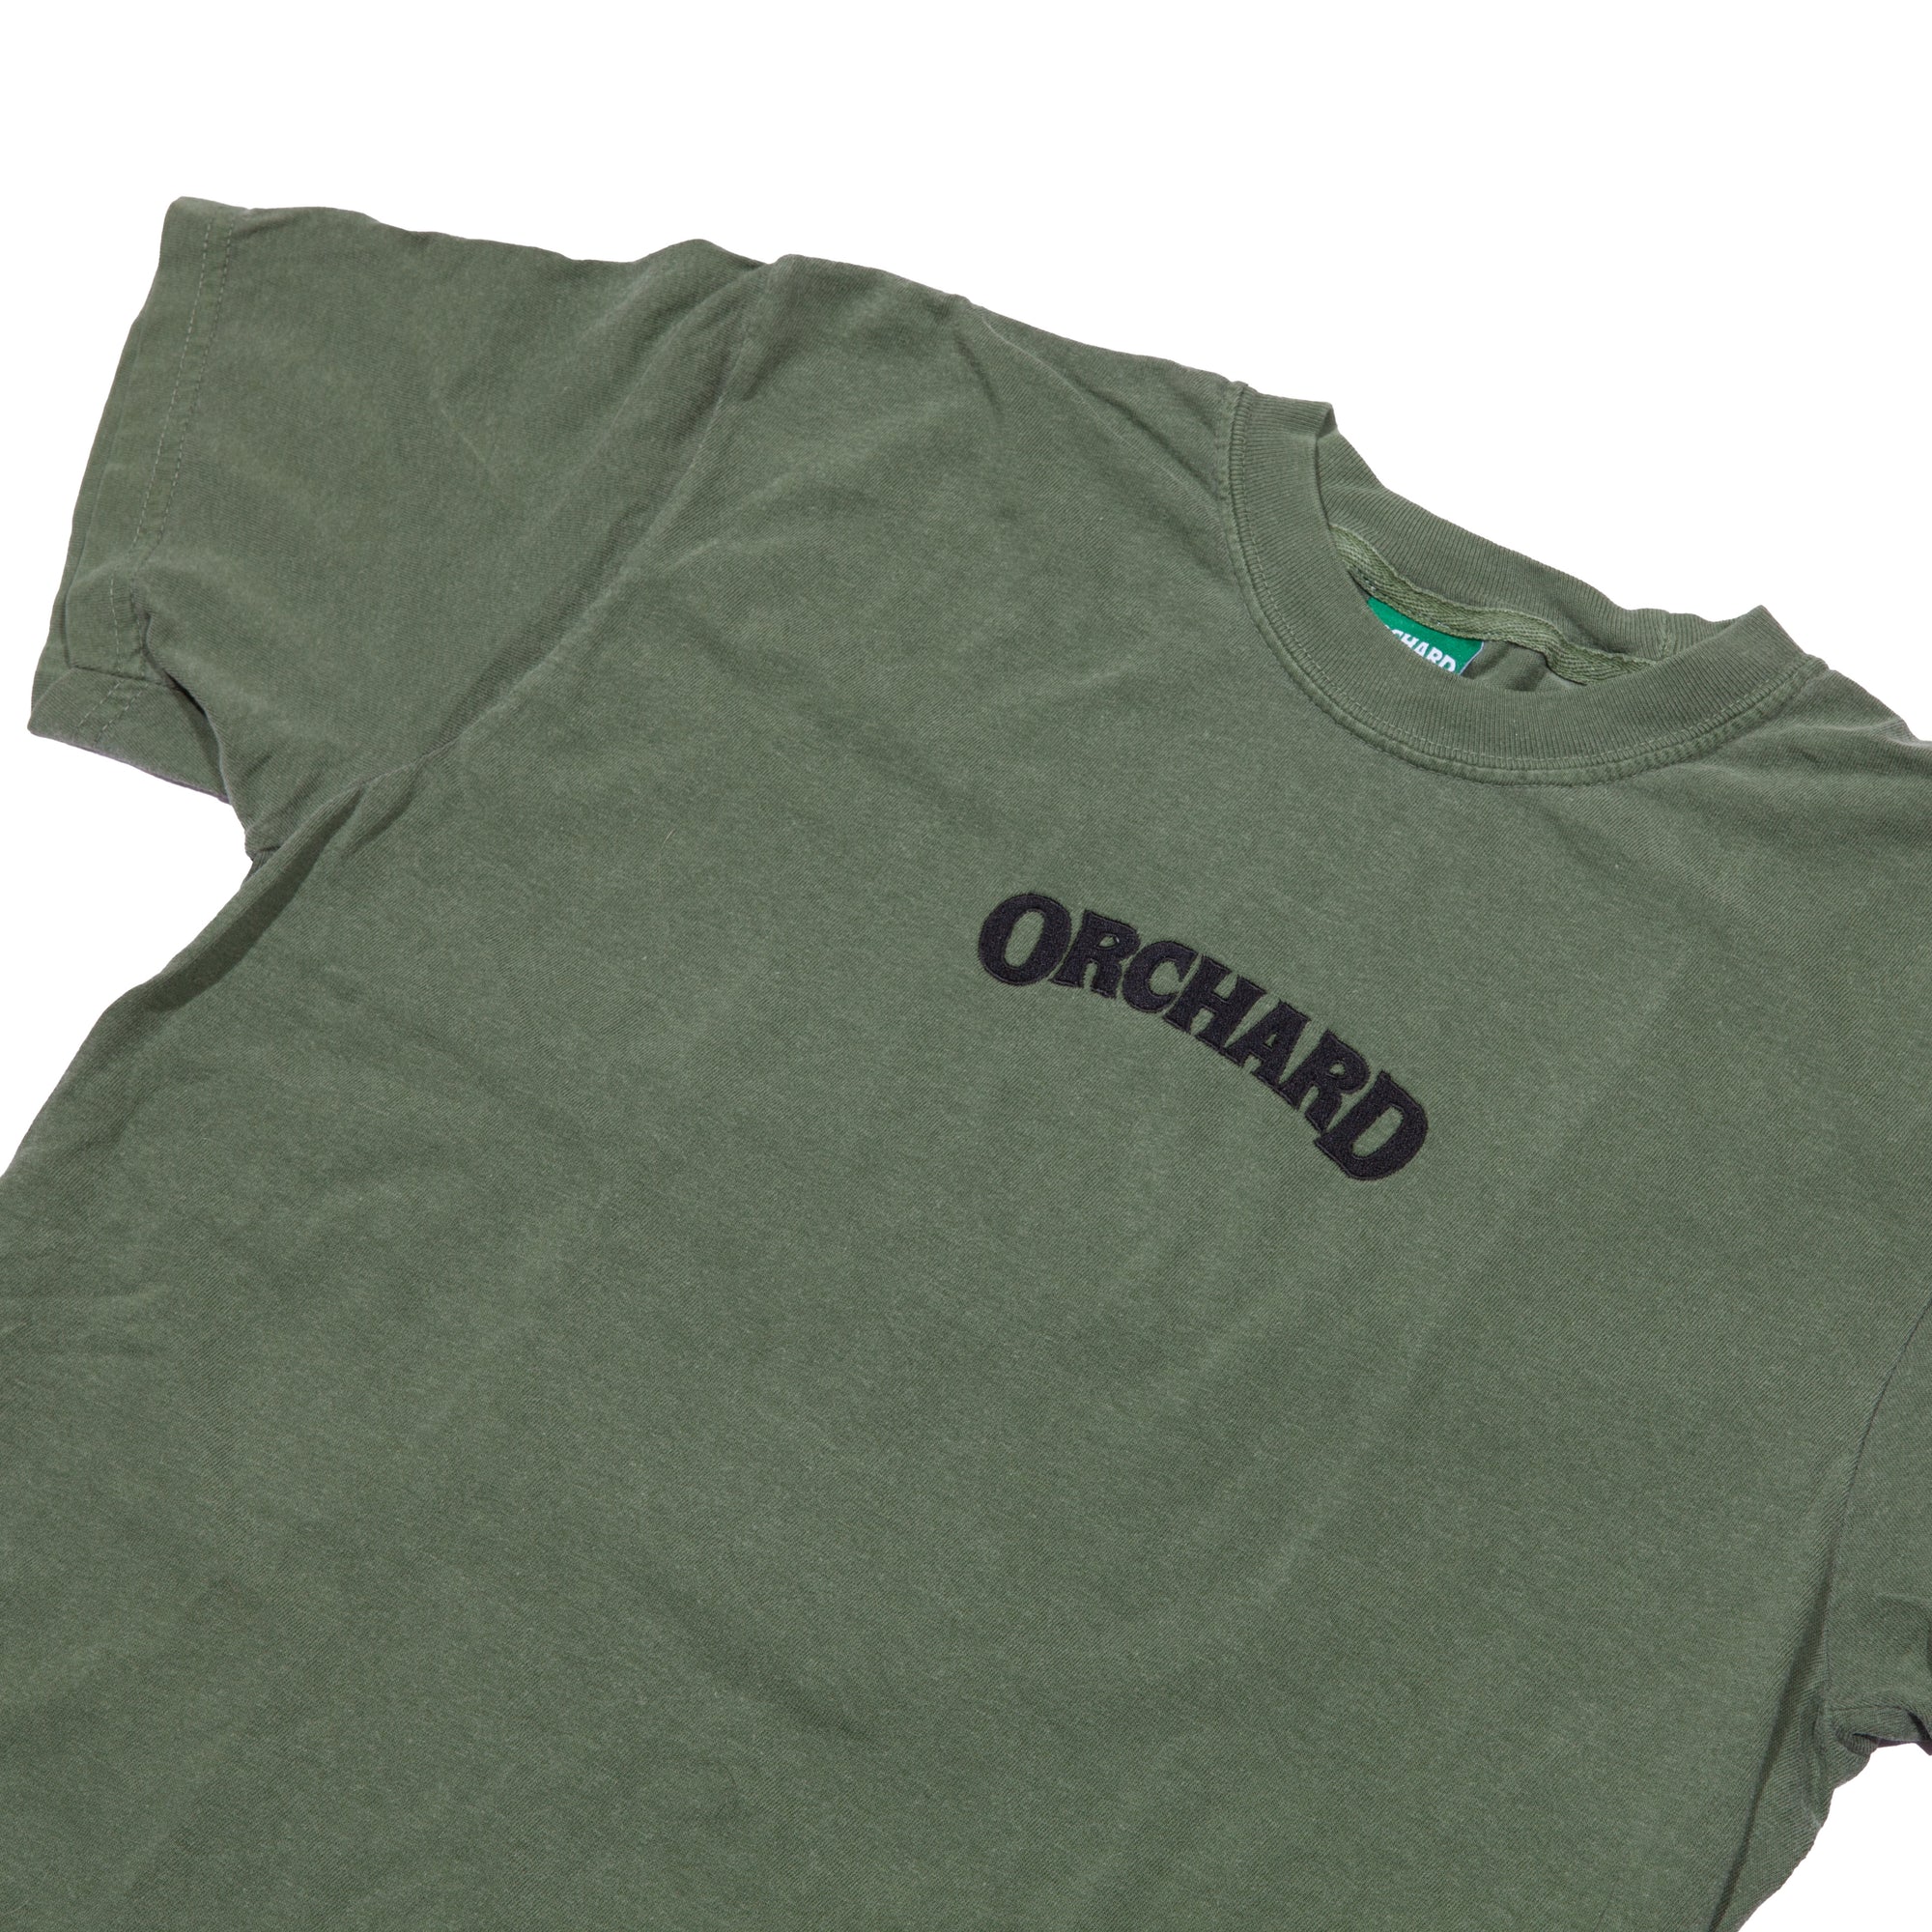 Orchard Embroidered Text Logo Tee Hemp/Black Garment Dyed